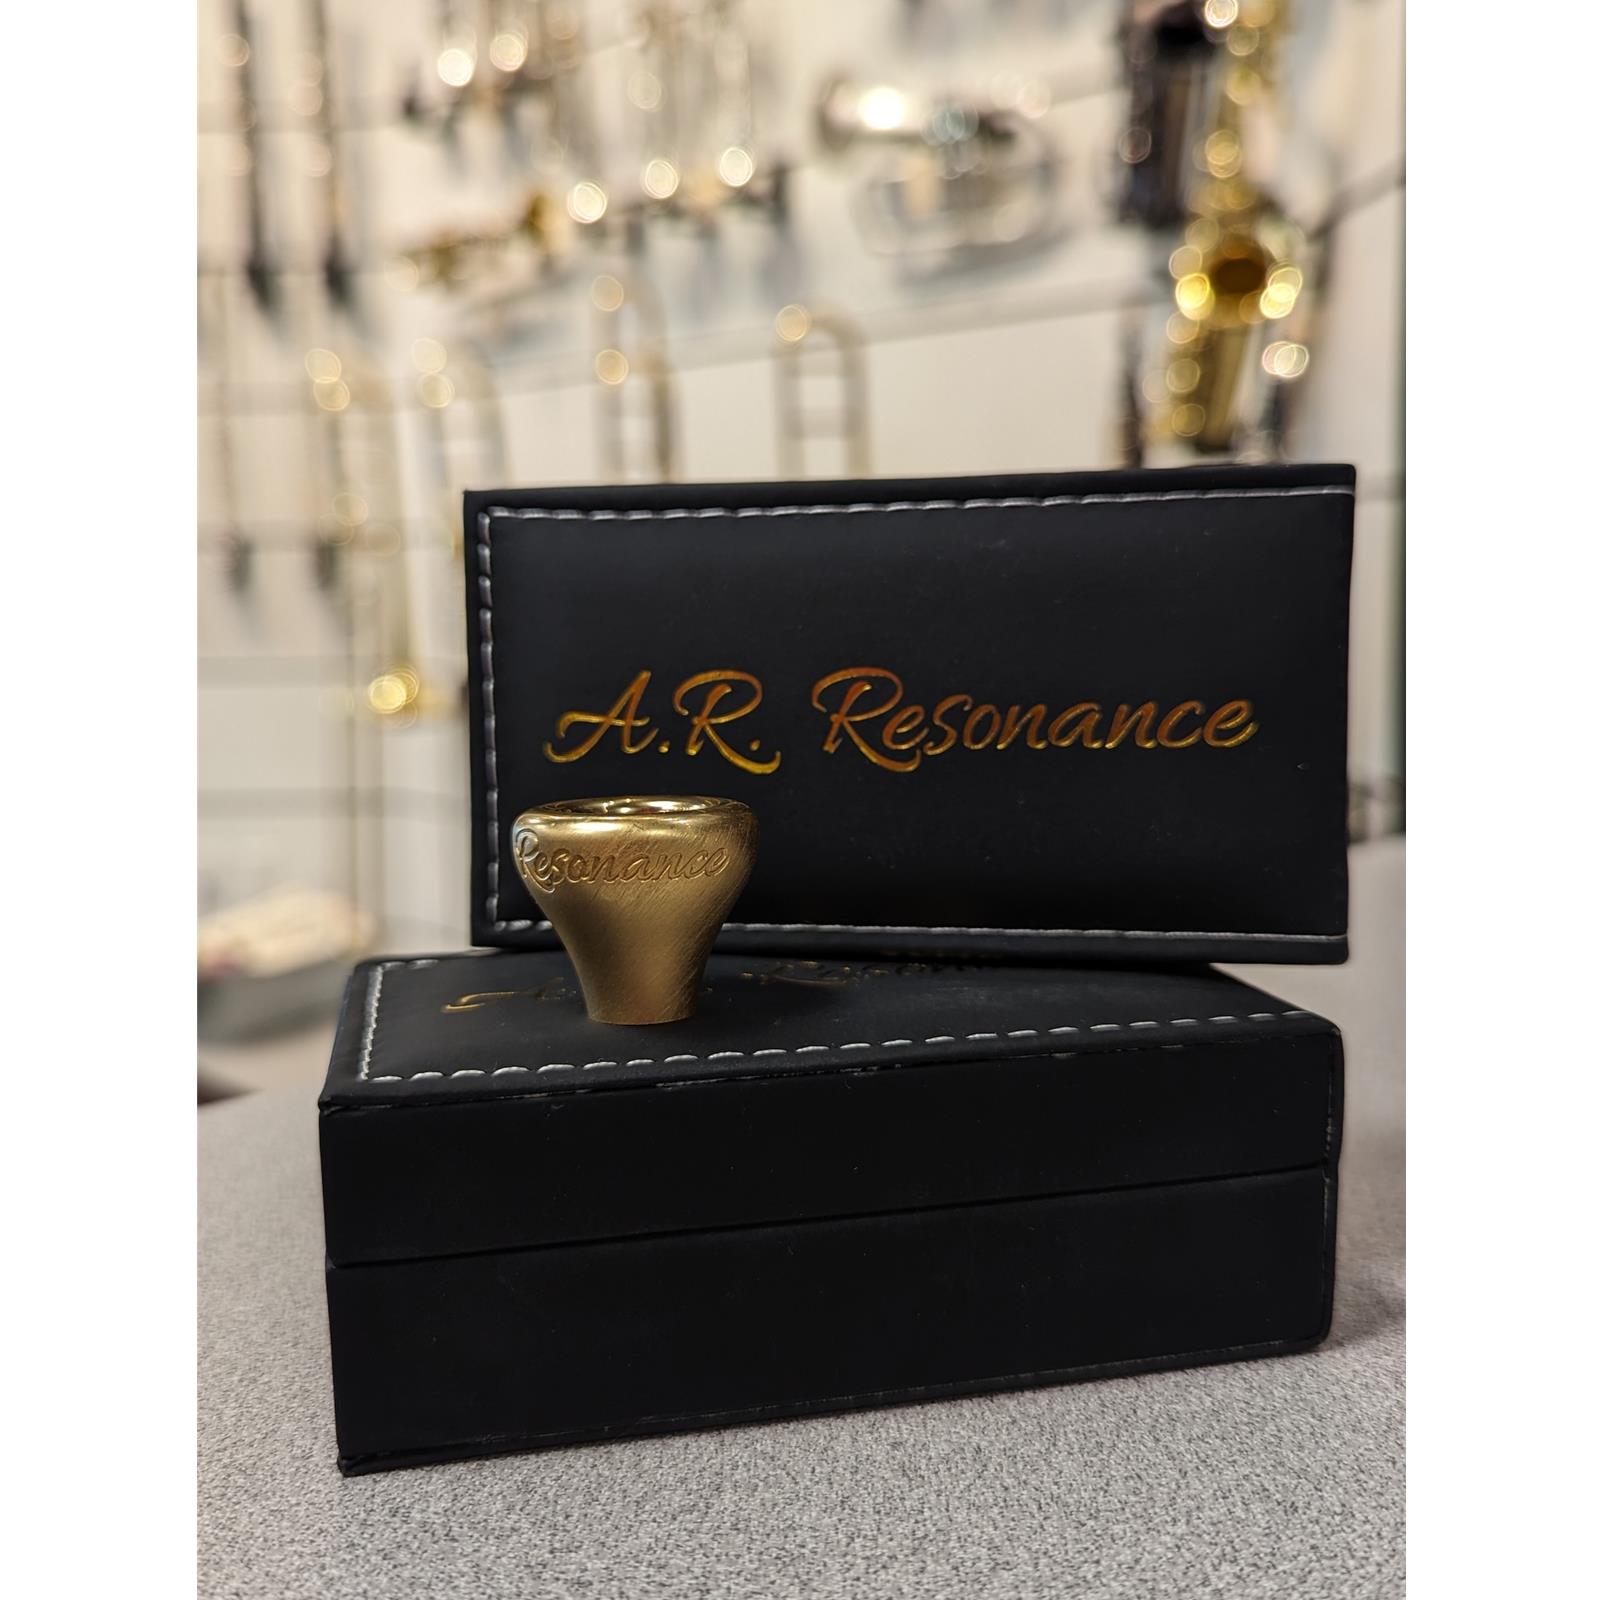 Buy Bach Gold Plated Trumpet Mouthpiece (3C Cup)